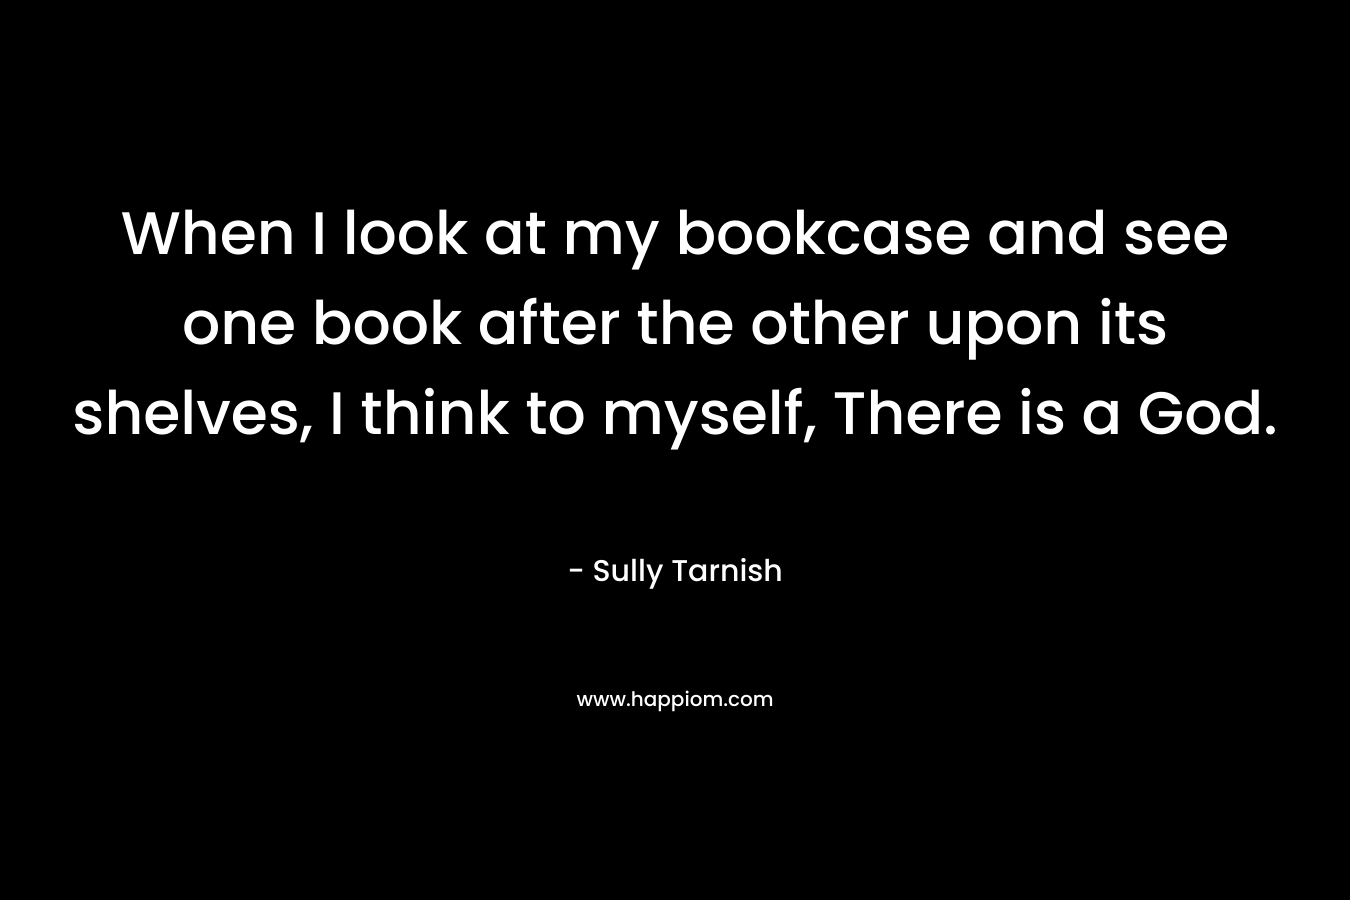 When I look at my bookcase and see one book after the other upon its shelves, I think to myself, There is a God. – Sully Tarnish